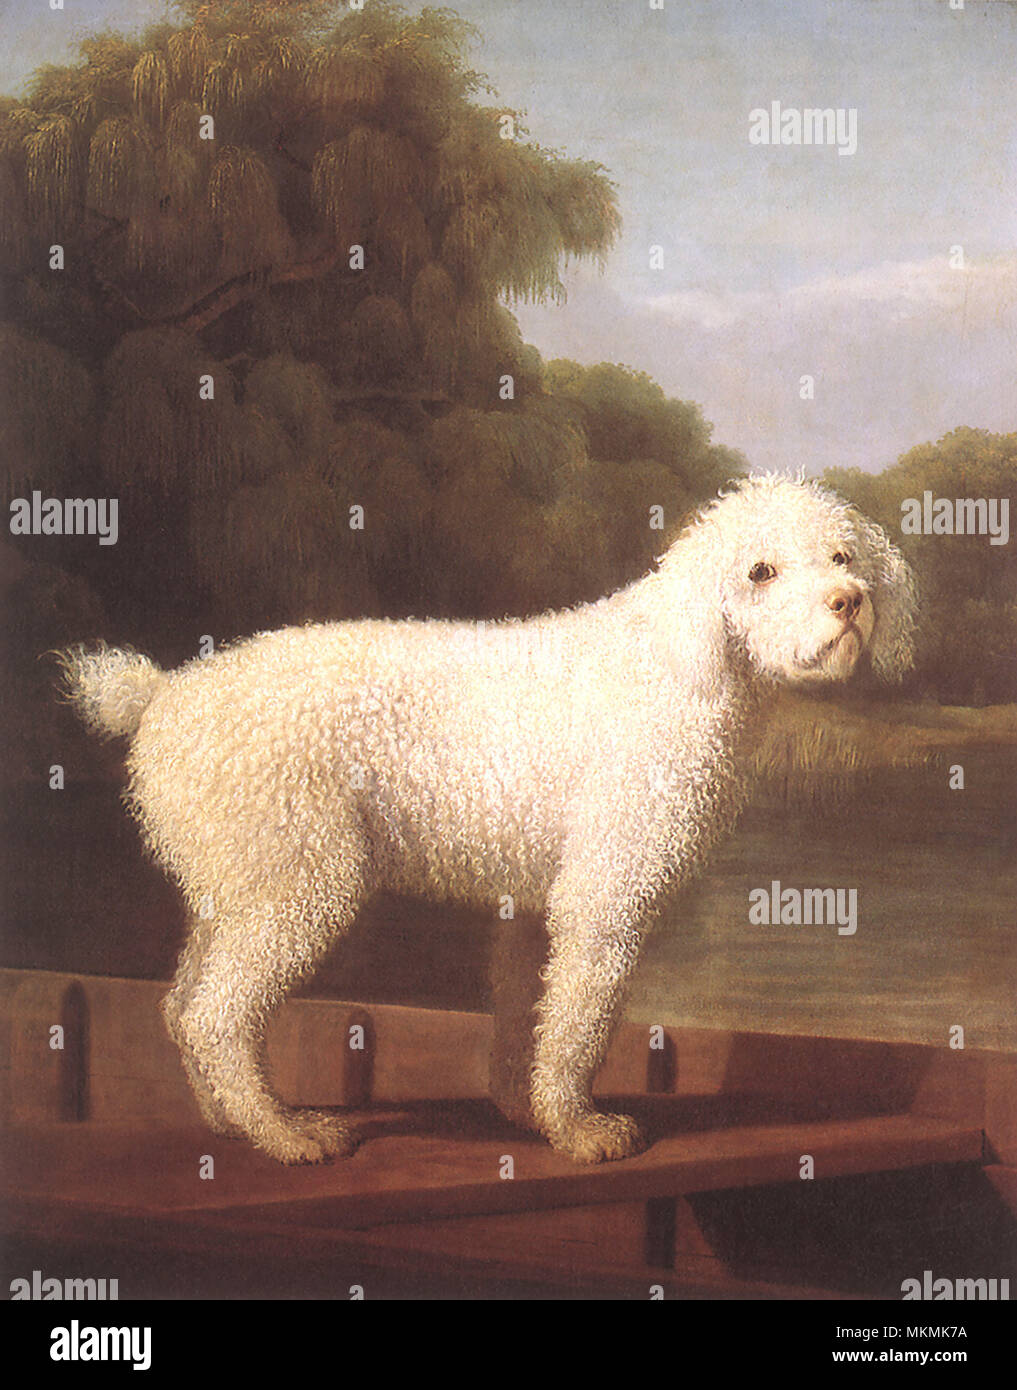 White Poodle in Punt Stock Photo